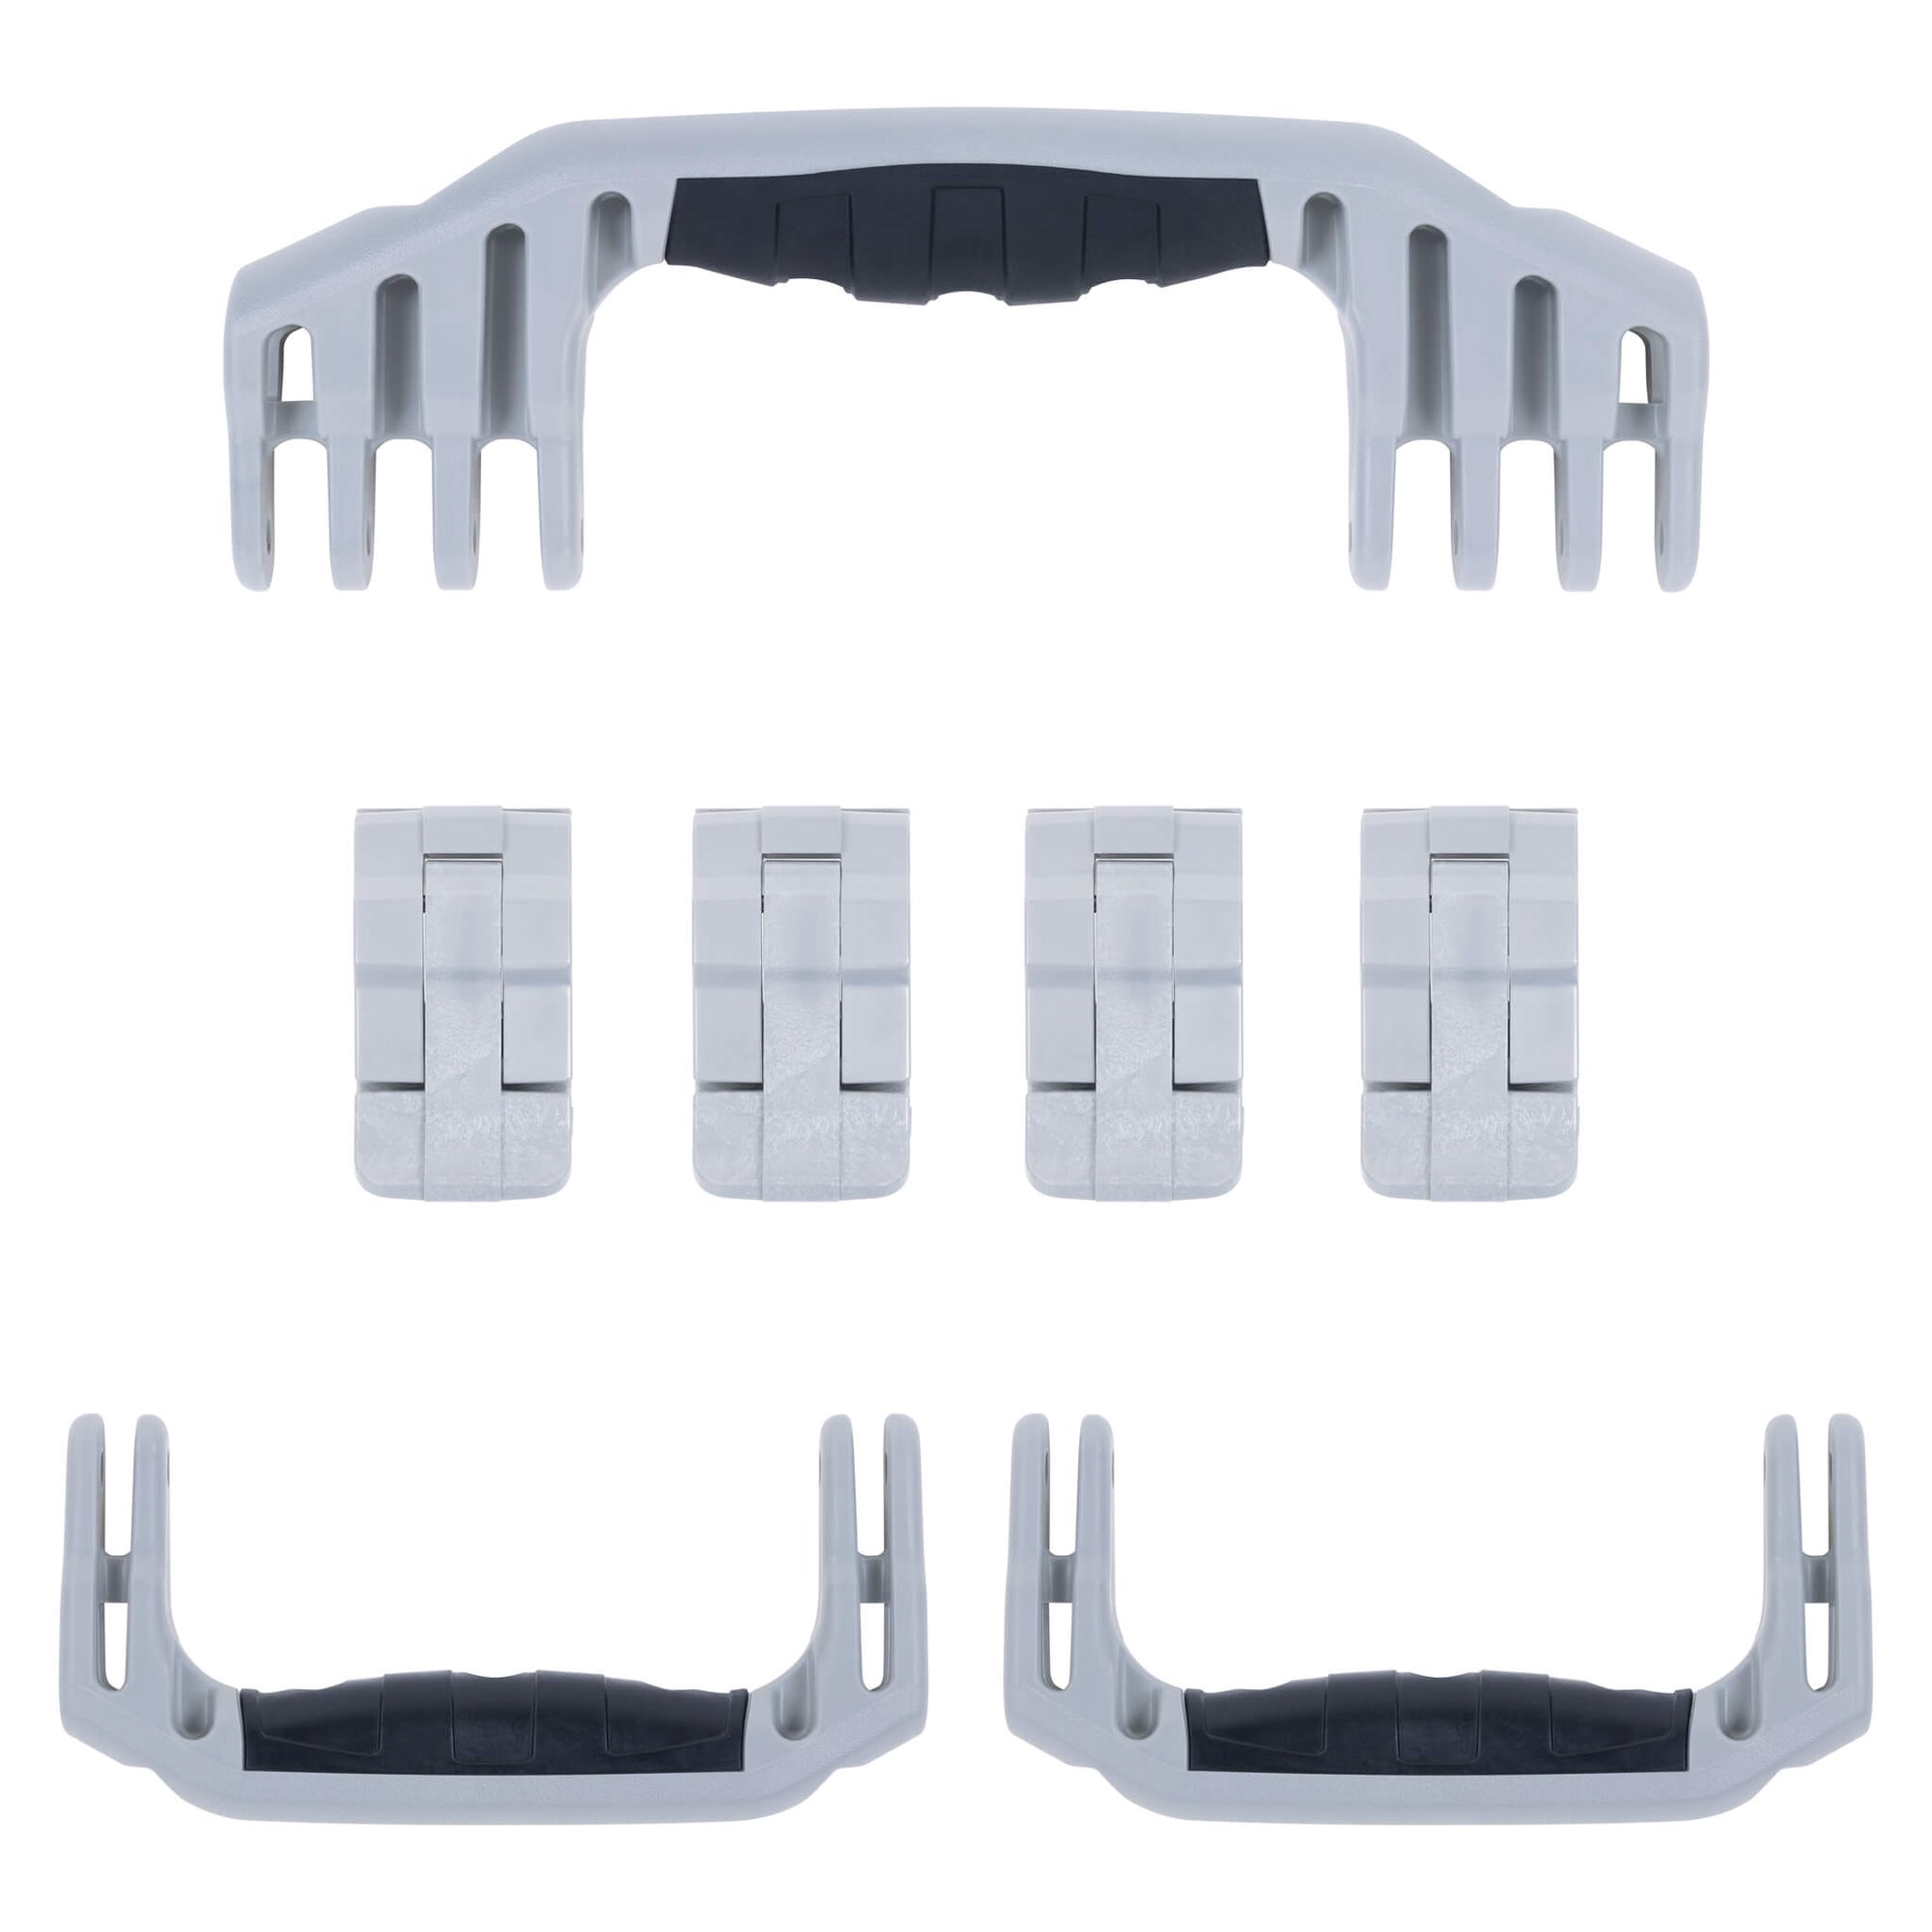 Pelican 1620 Replacement Handles & Latches, Silver (Set of 3 Handles, 4 Latches) ColorCase 